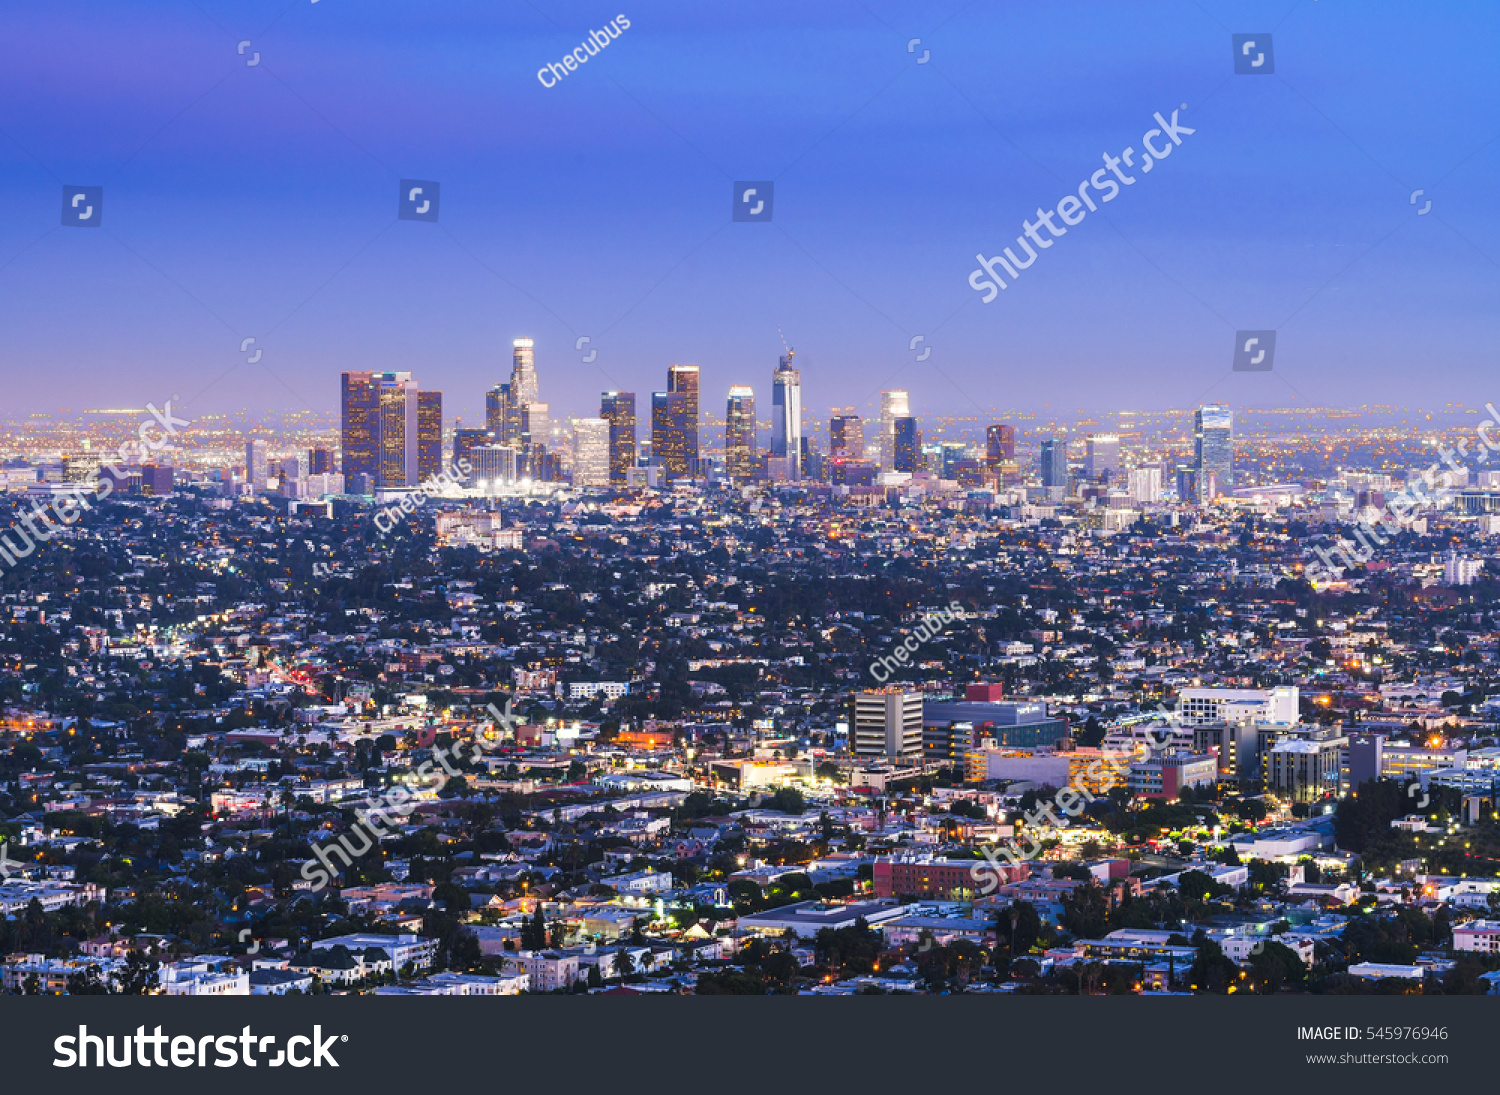 scenic view of Los Angeles skyscrapers at night,California,usa. #545976946